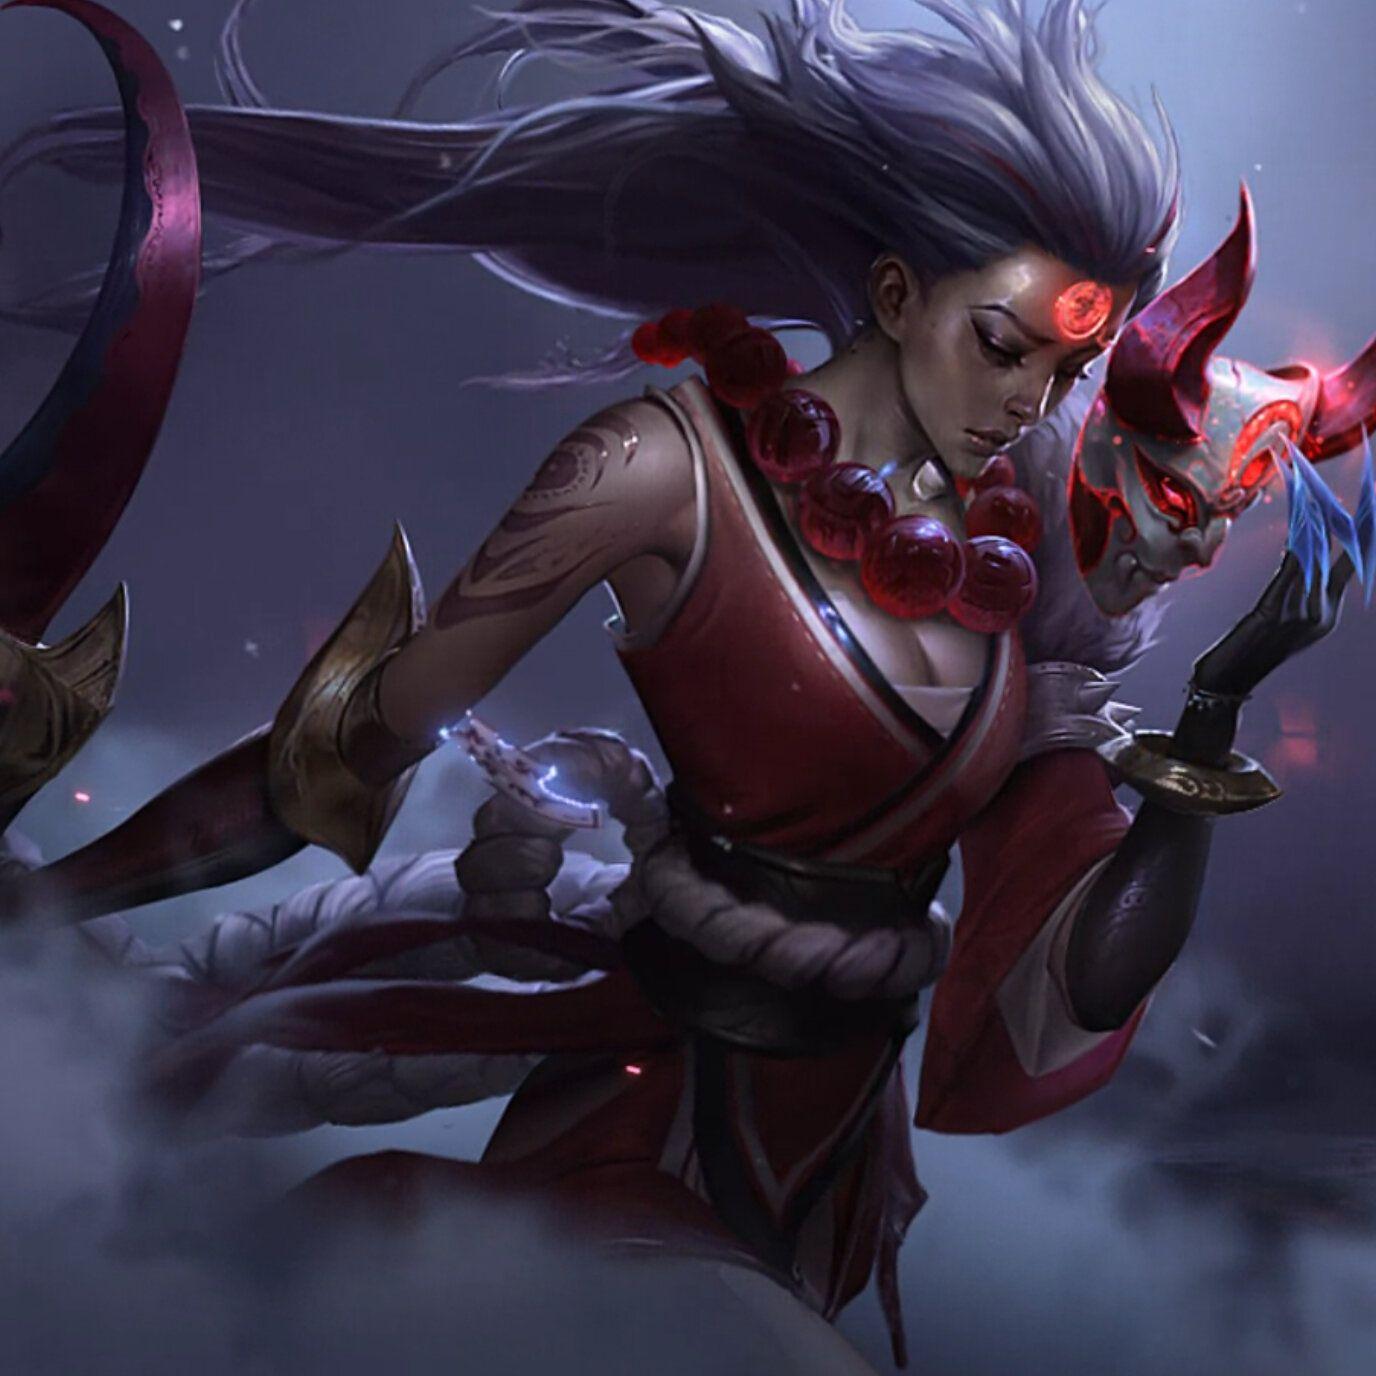 Blood Moon Diana Wallpapers - Top Free Blood Moon Diana ...